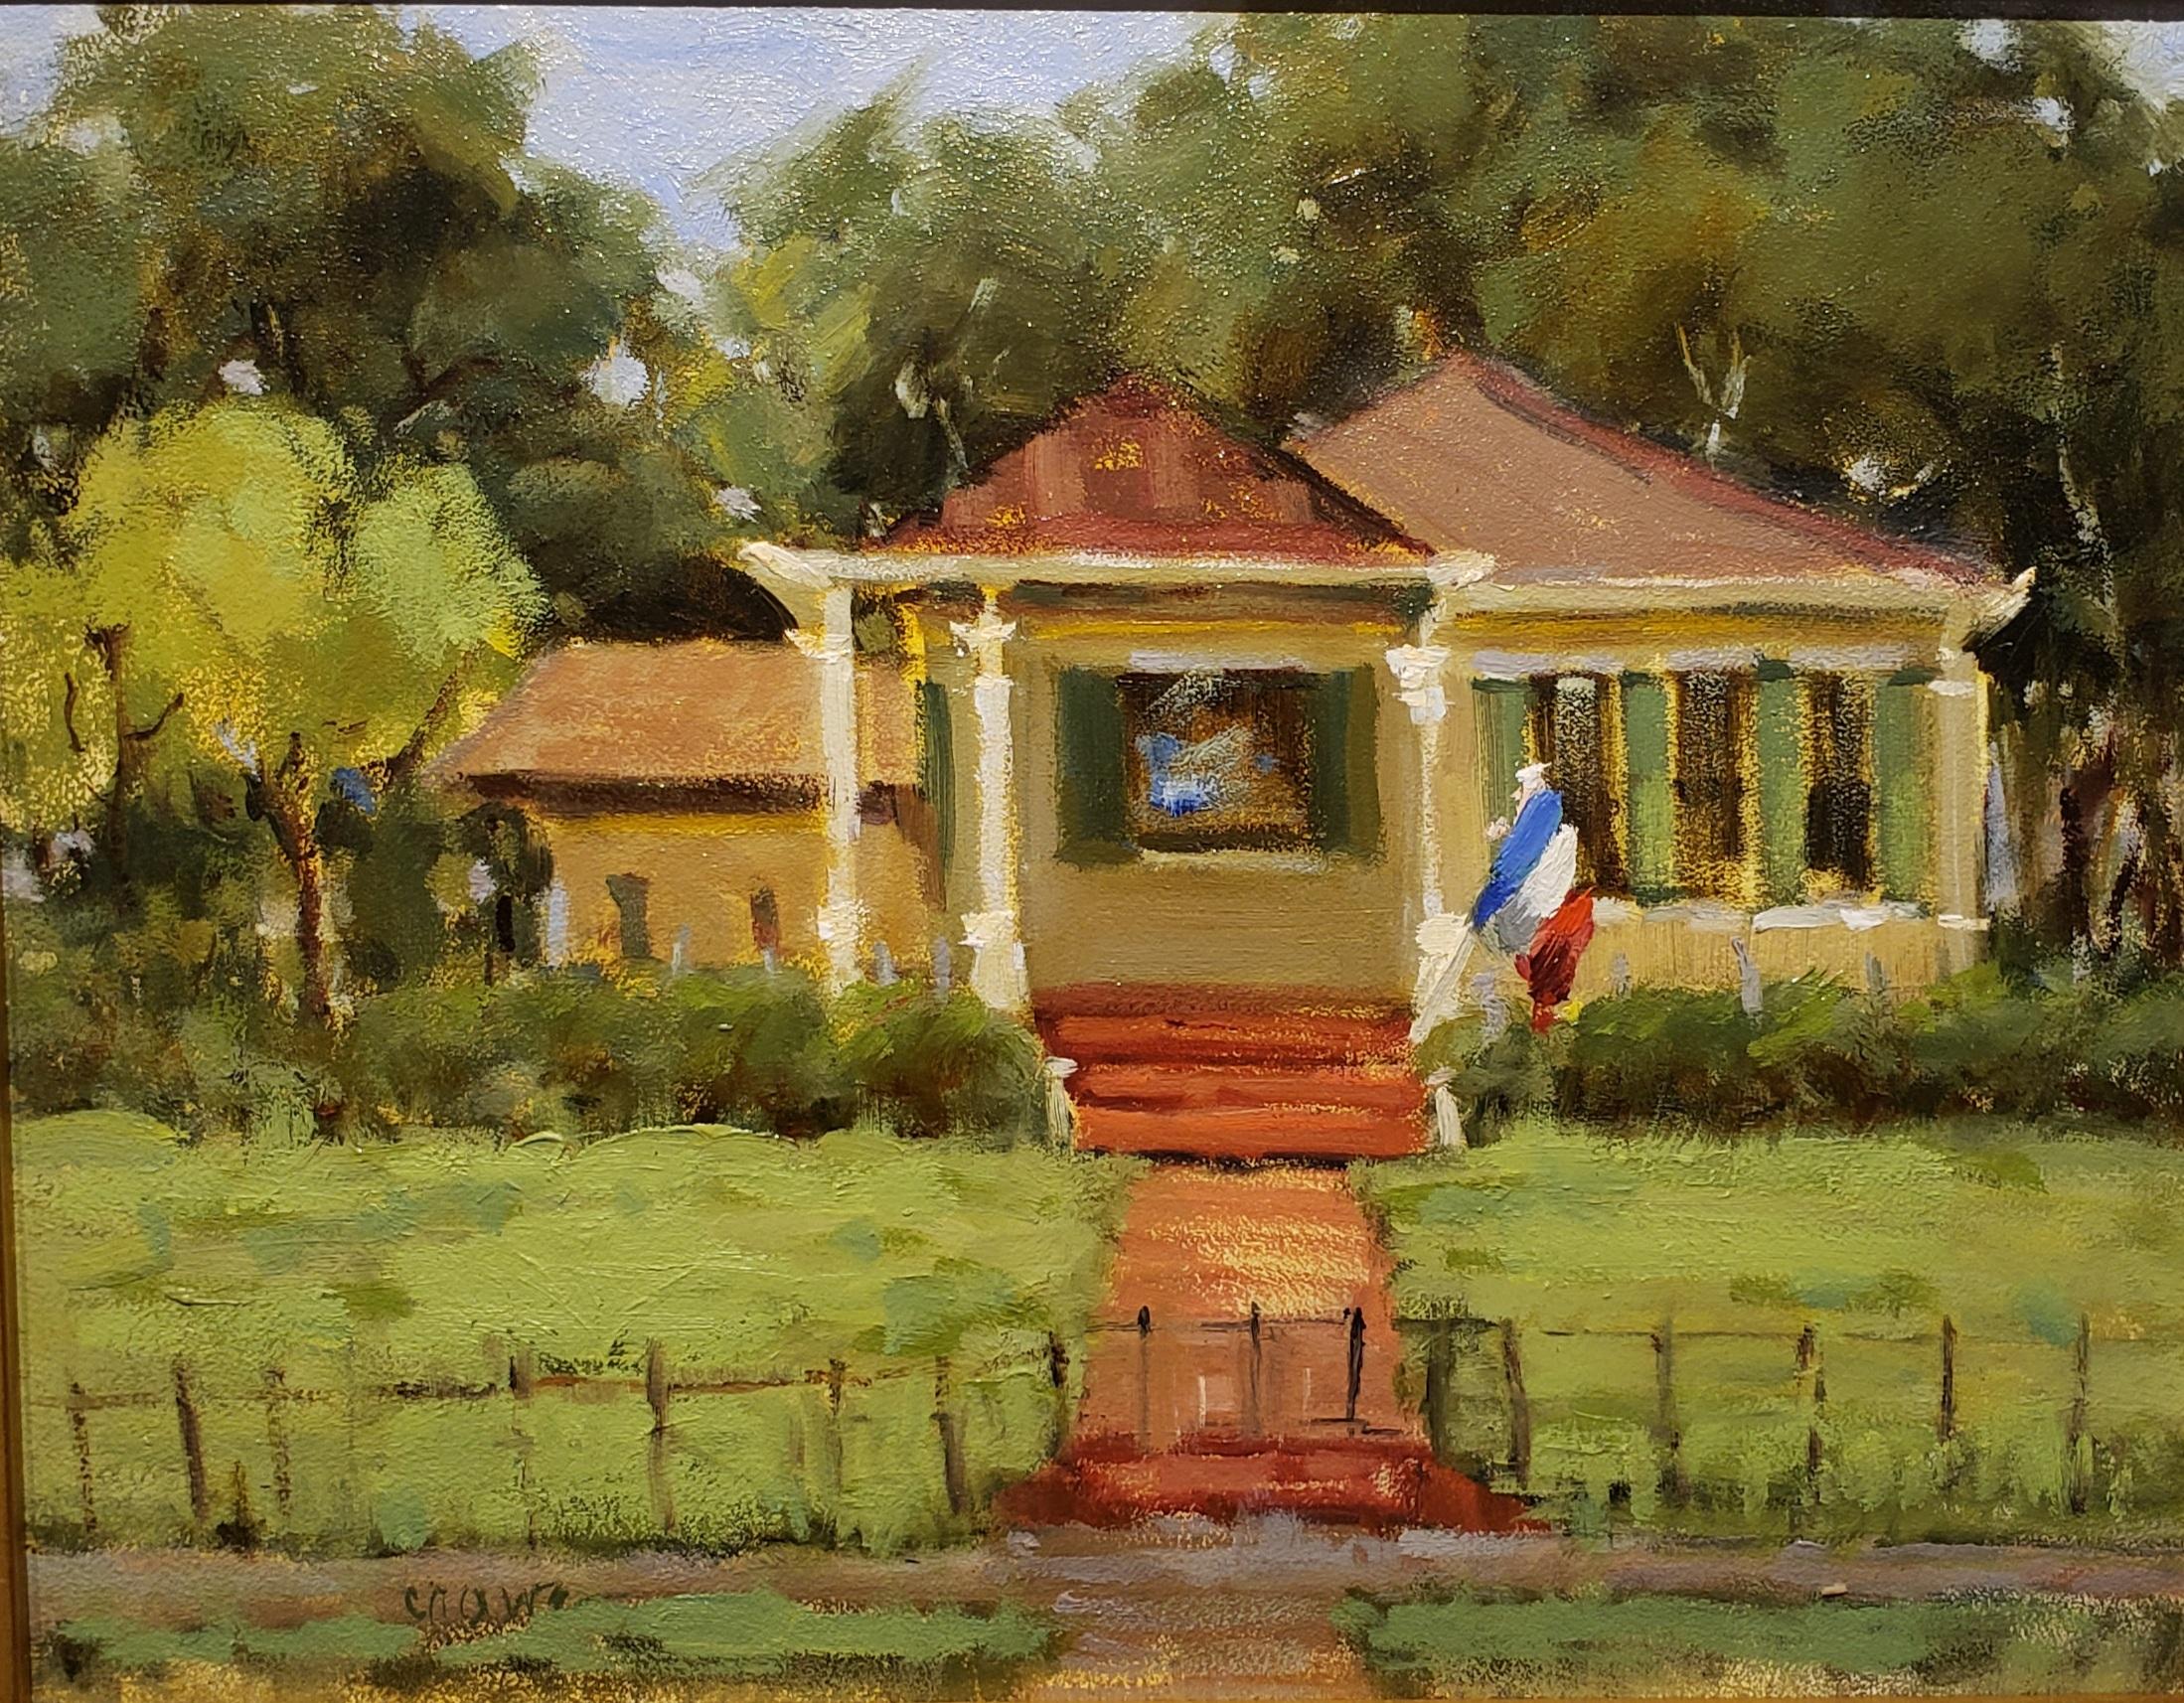   Bastille Day, oil painting , American Impressionism , SW Art Magazine 11/20/20 - Painting by Judy Crowe